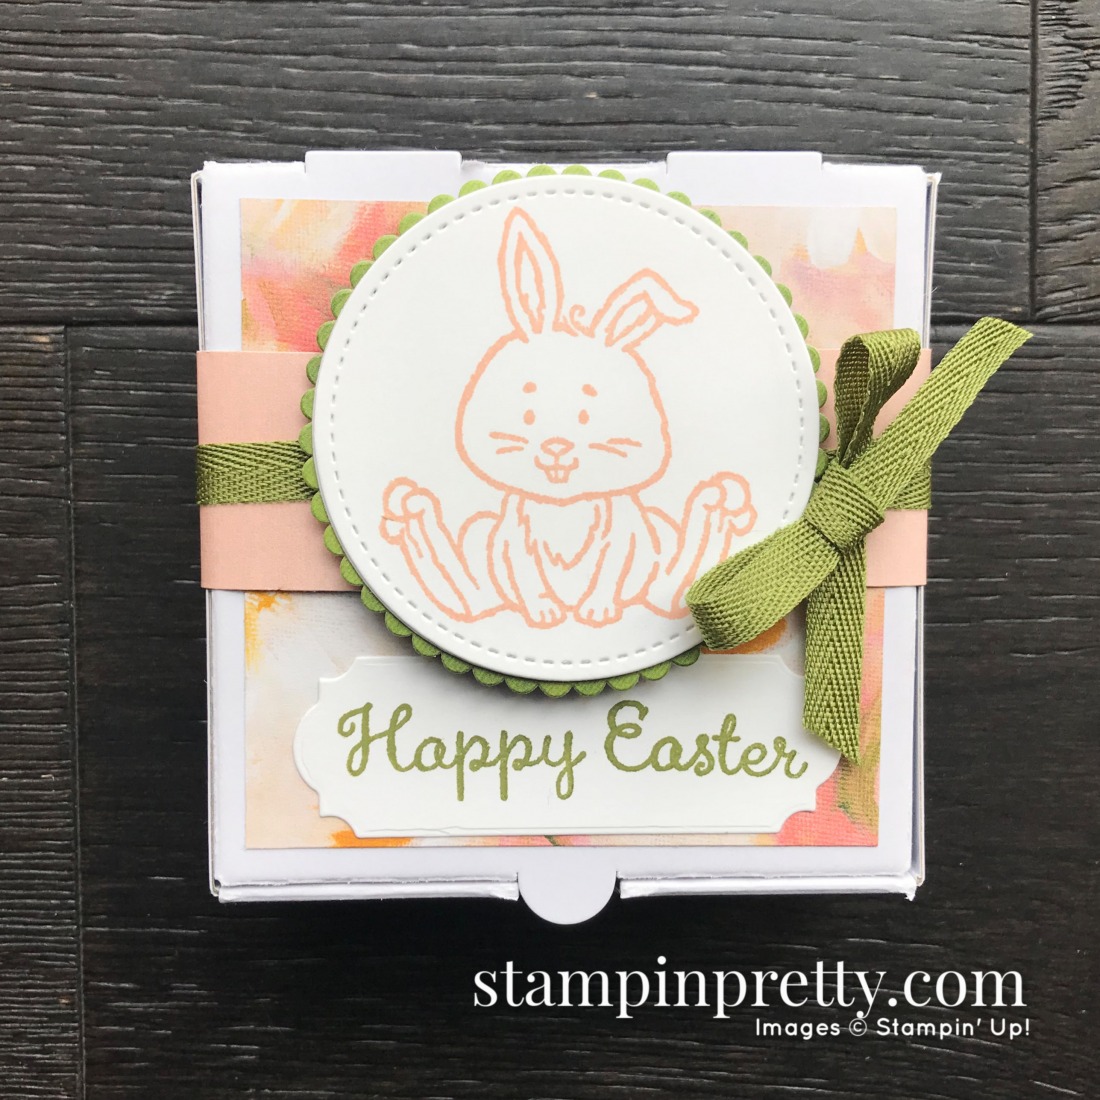 Create this Happy Easter Mini Pizza Gift Box using the Welcome Easter Stamp Set by Stampin' Up! Mary Fish, Stampin' Pretty